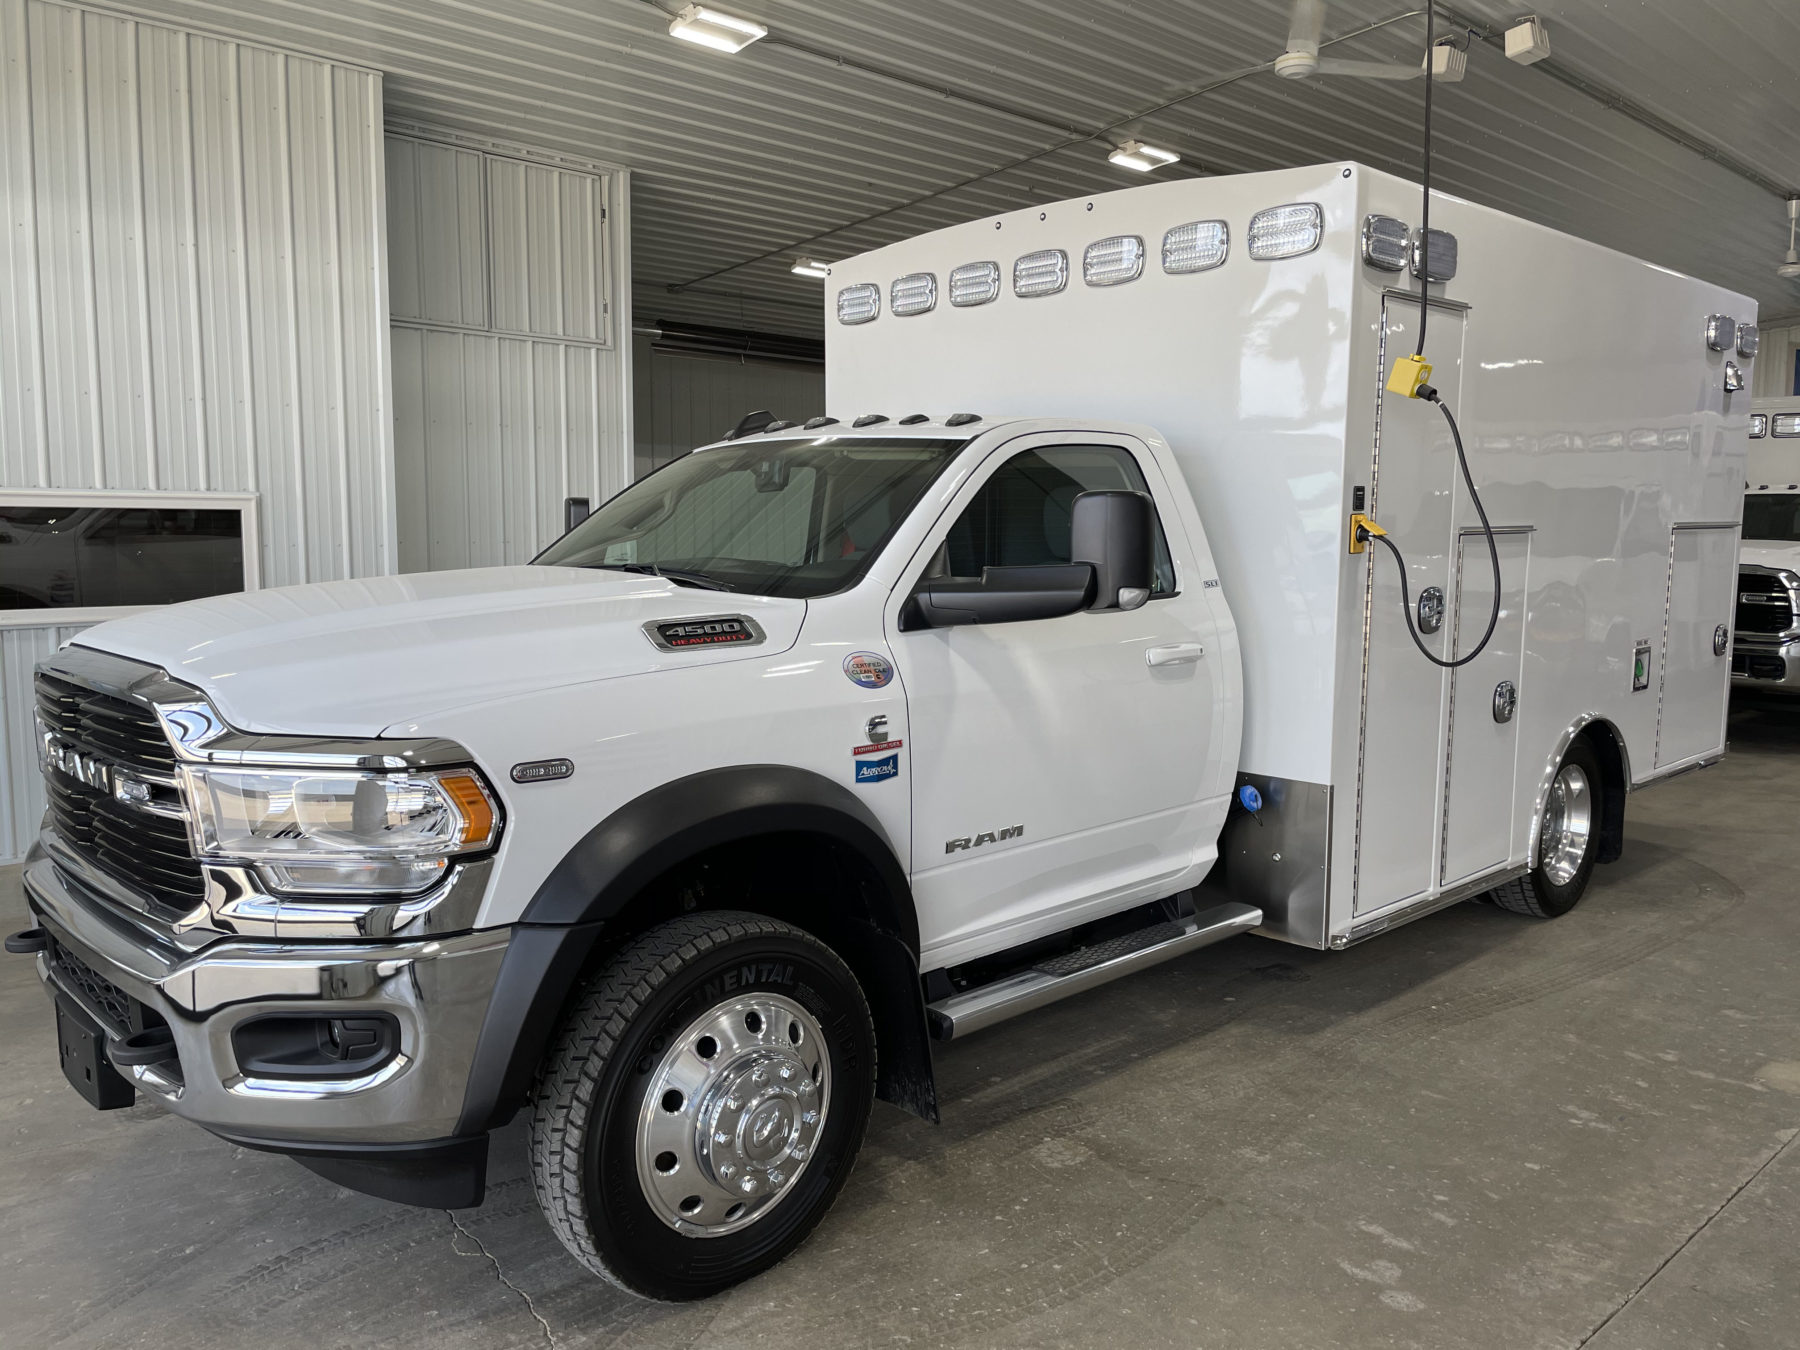 2020 Ram 4500 4x4 Heavy Duty Ambulance For Sale – Picture 5